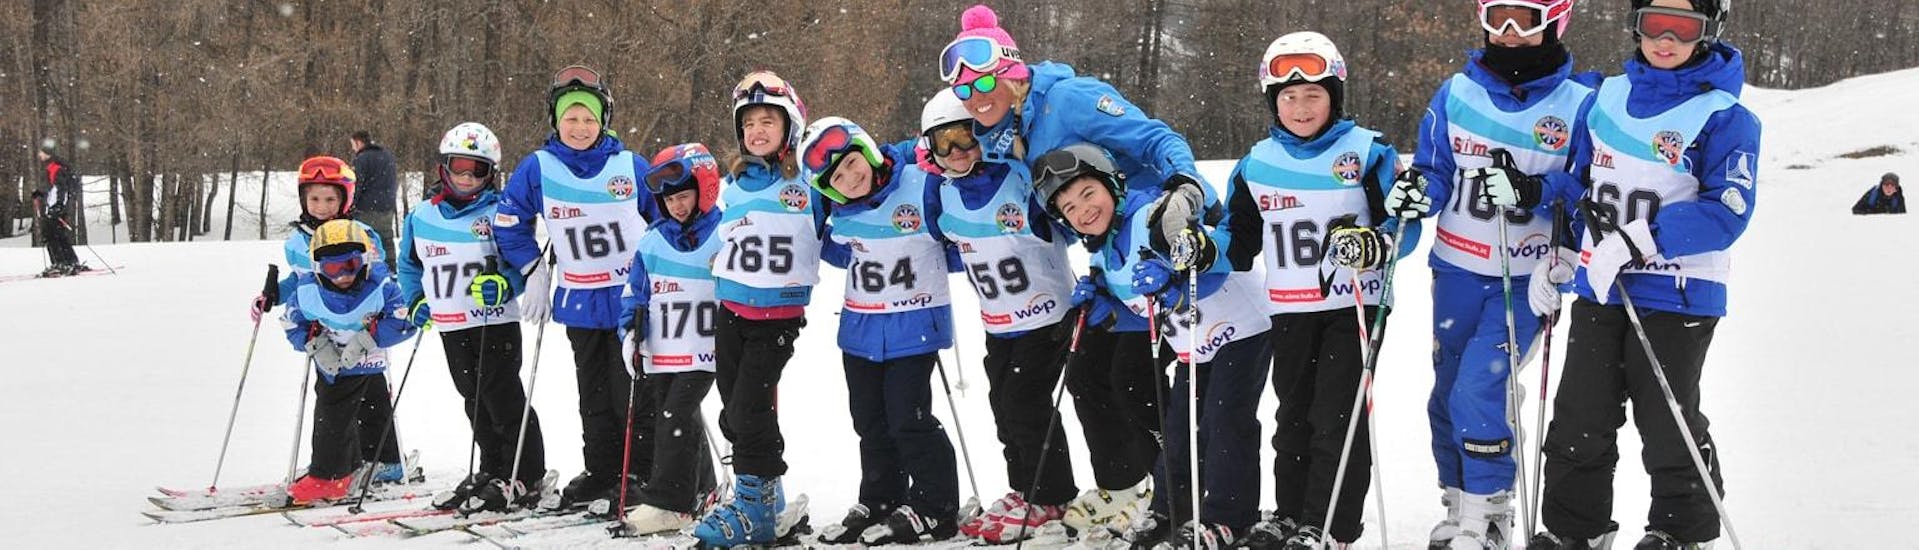 A group of little ski enthusiasts during the Kids Ski Lessons (4-14 y.) - High Season - Advanced organised by the ski school Scuola di Sci Bardonecchia.